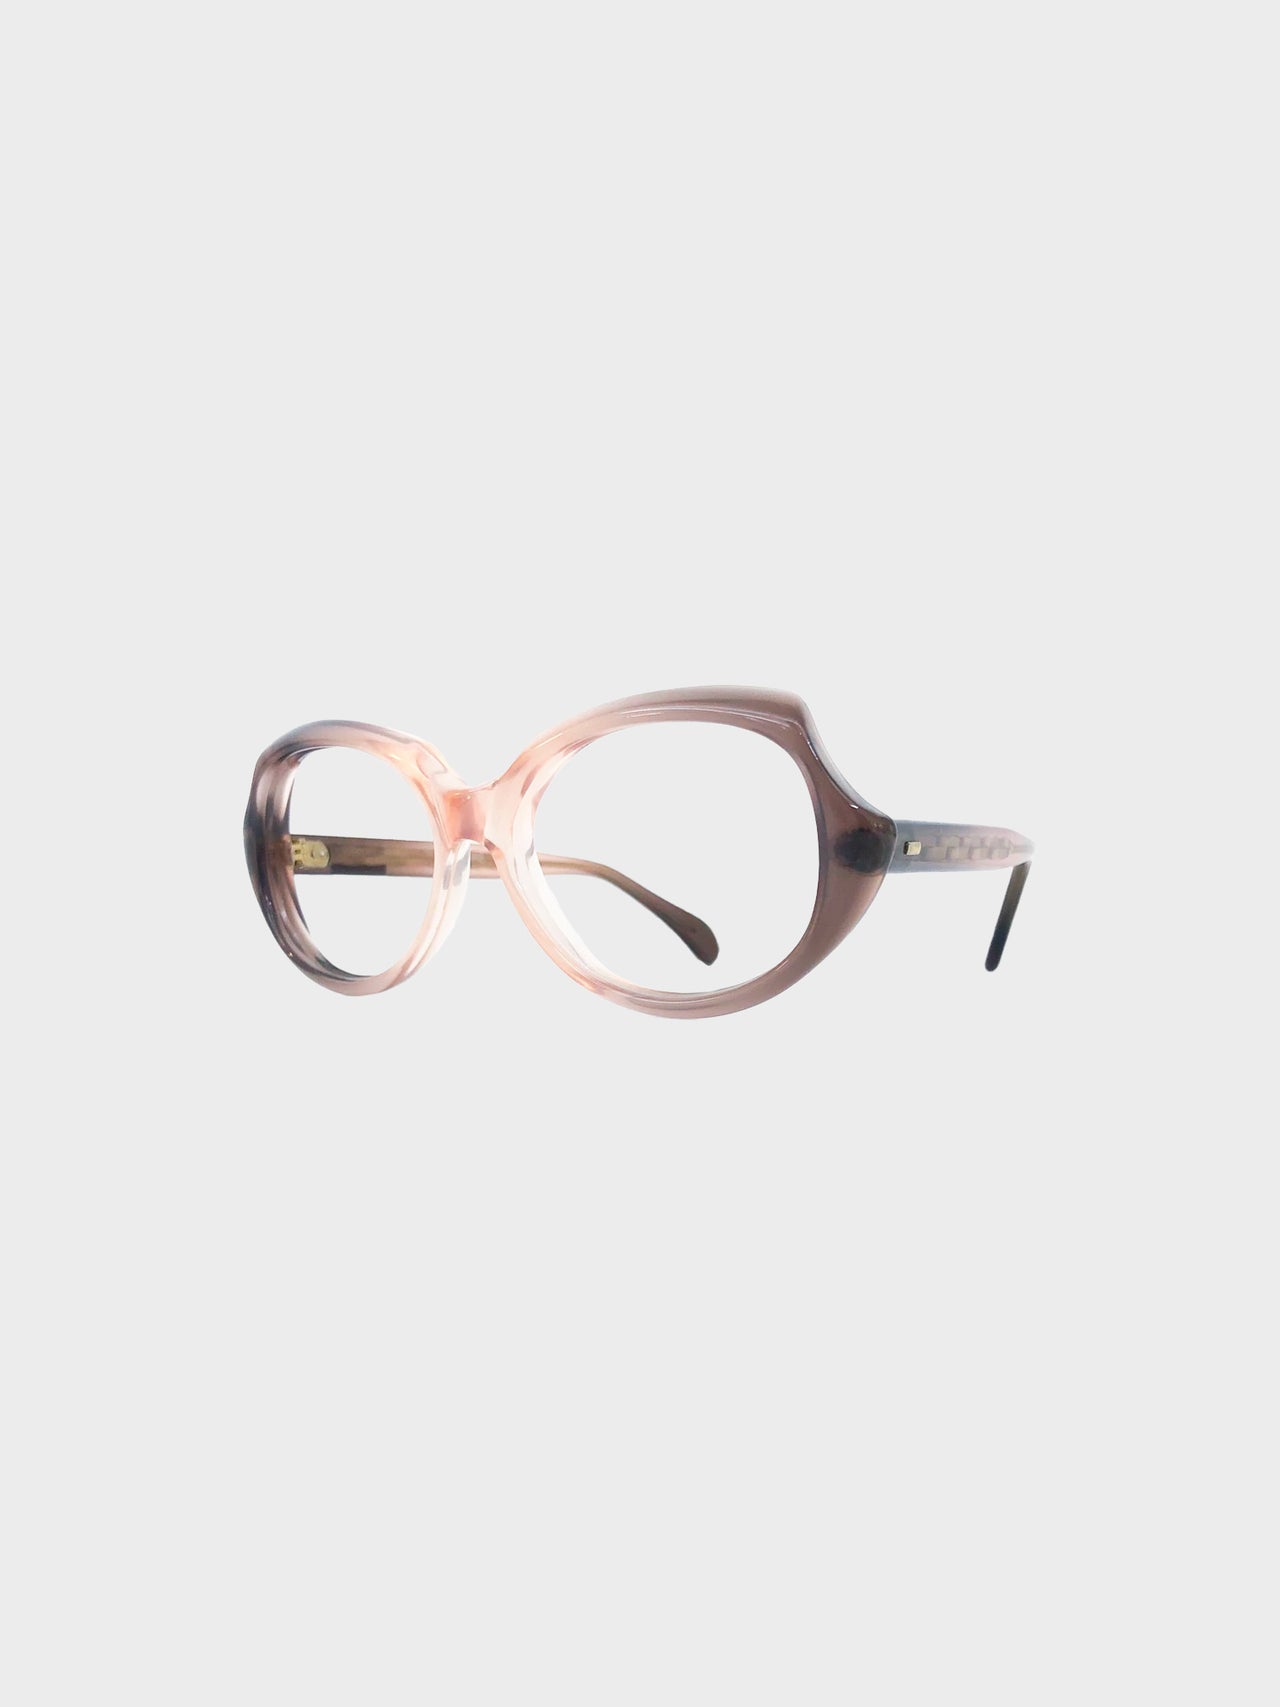 FRENCH VINTAGE / Clear glasses (PINK GRAY) #FV42